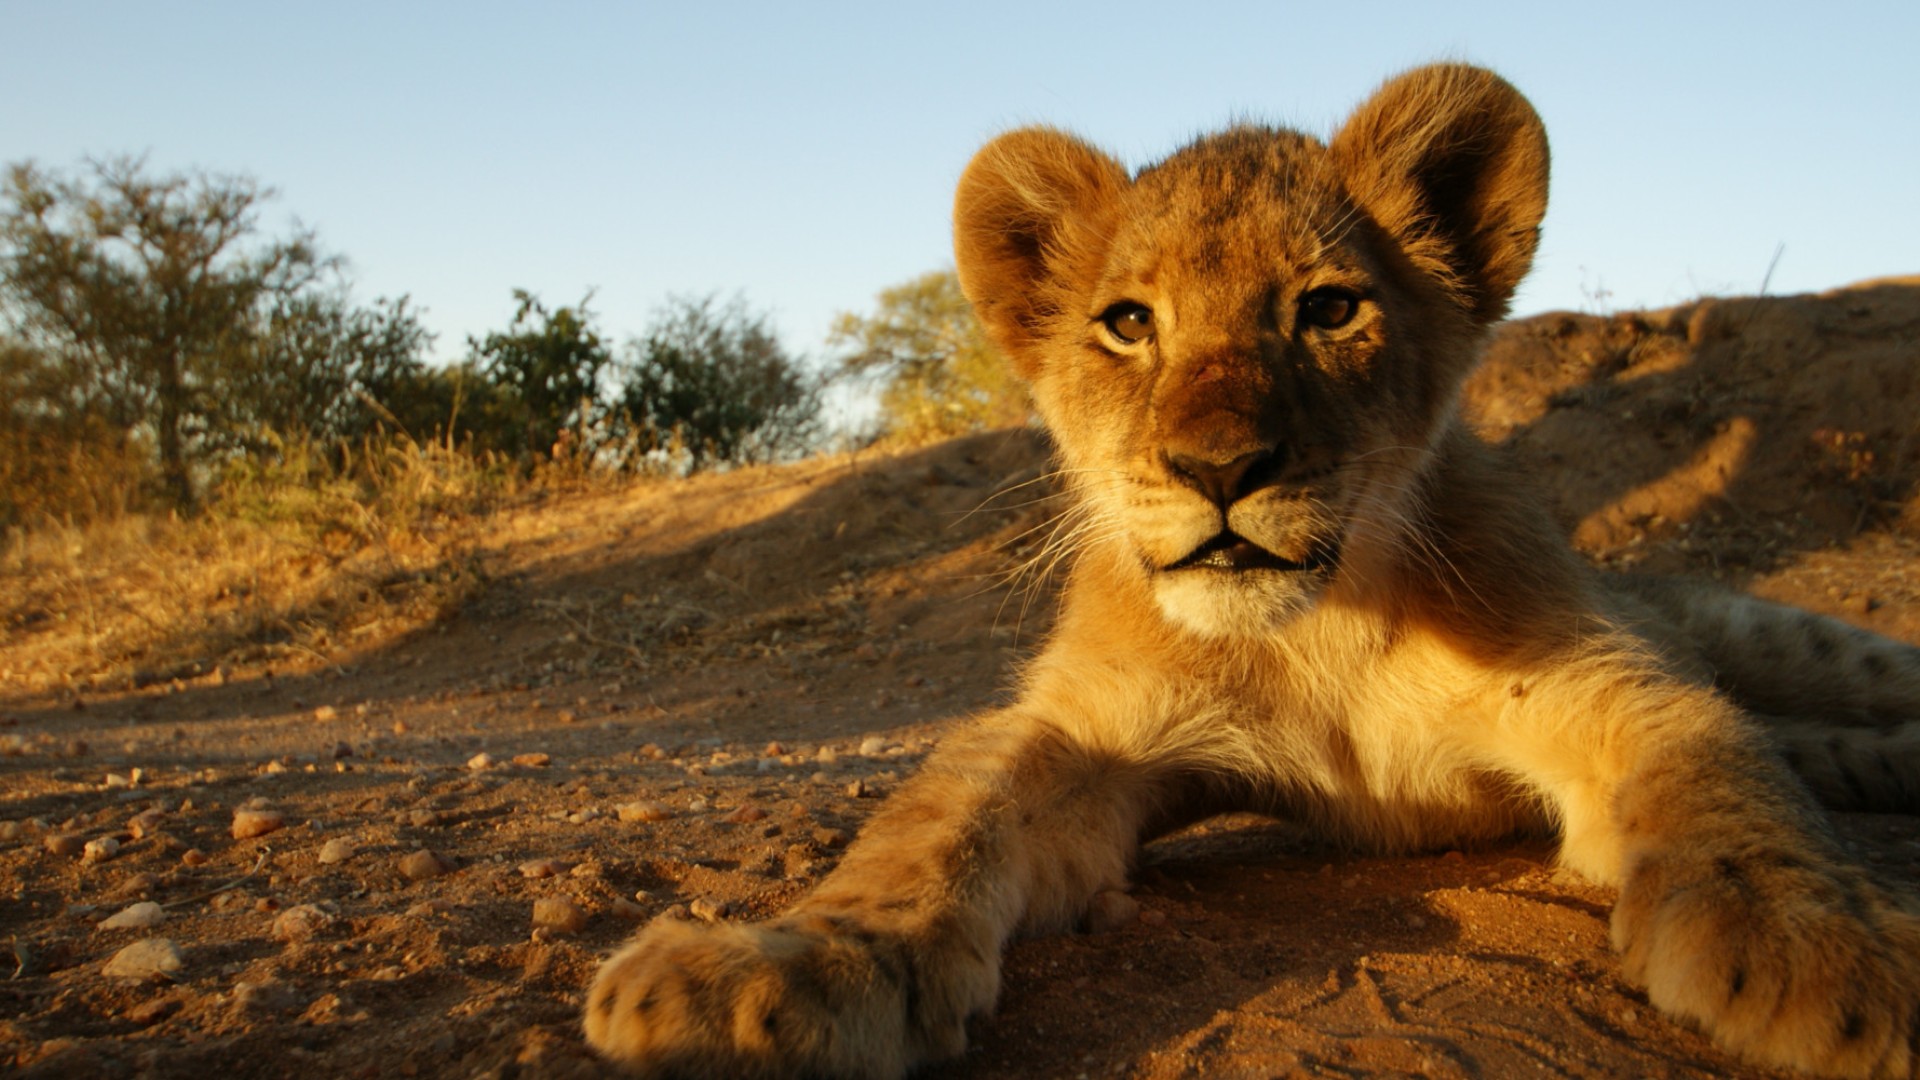 lion cub laying down in the dirt at sunset in South Africa